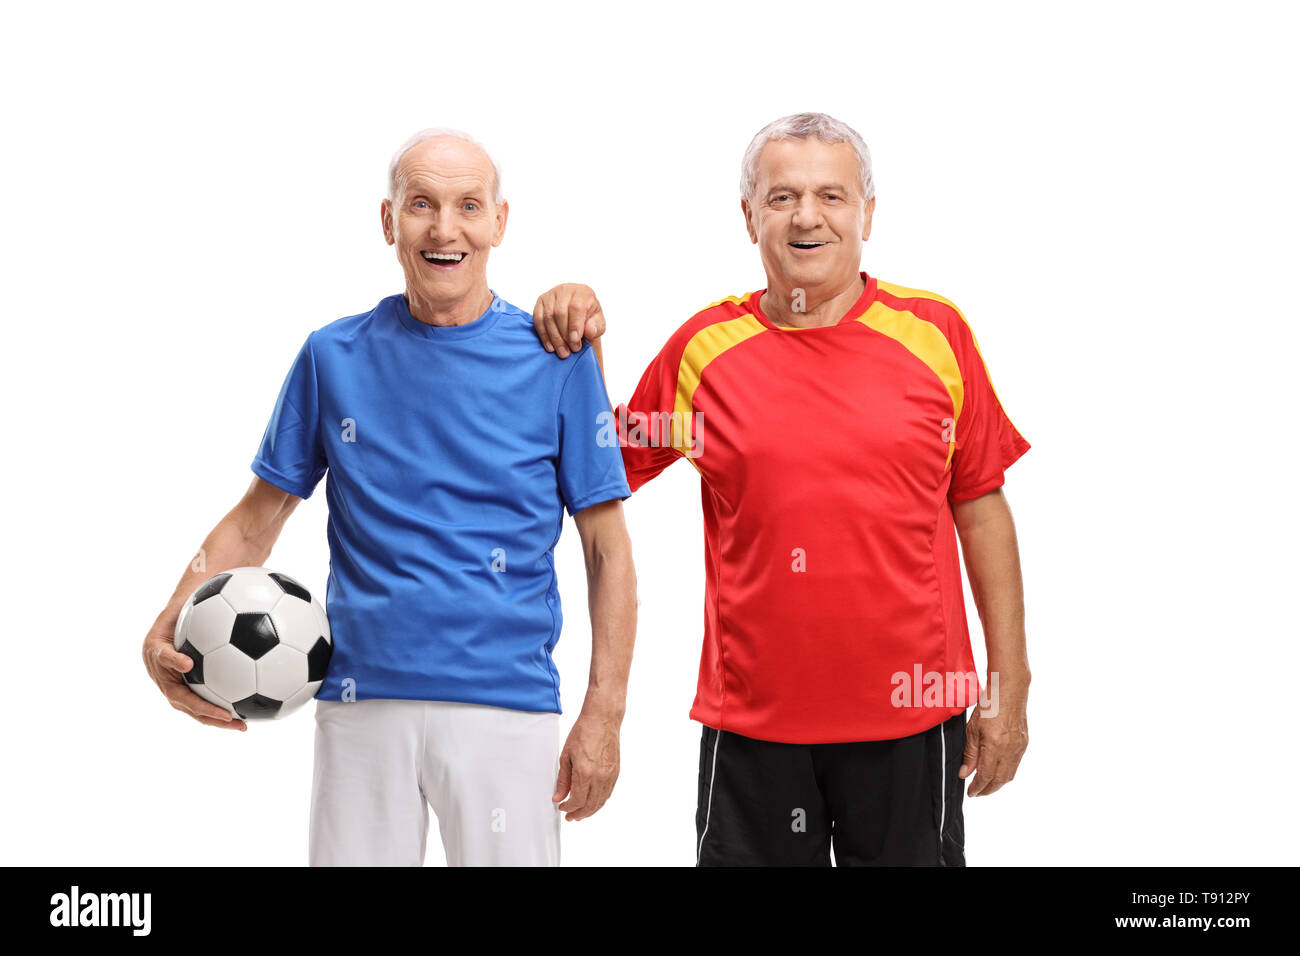 Two elderly soccer players isolated on white background Stock Photo